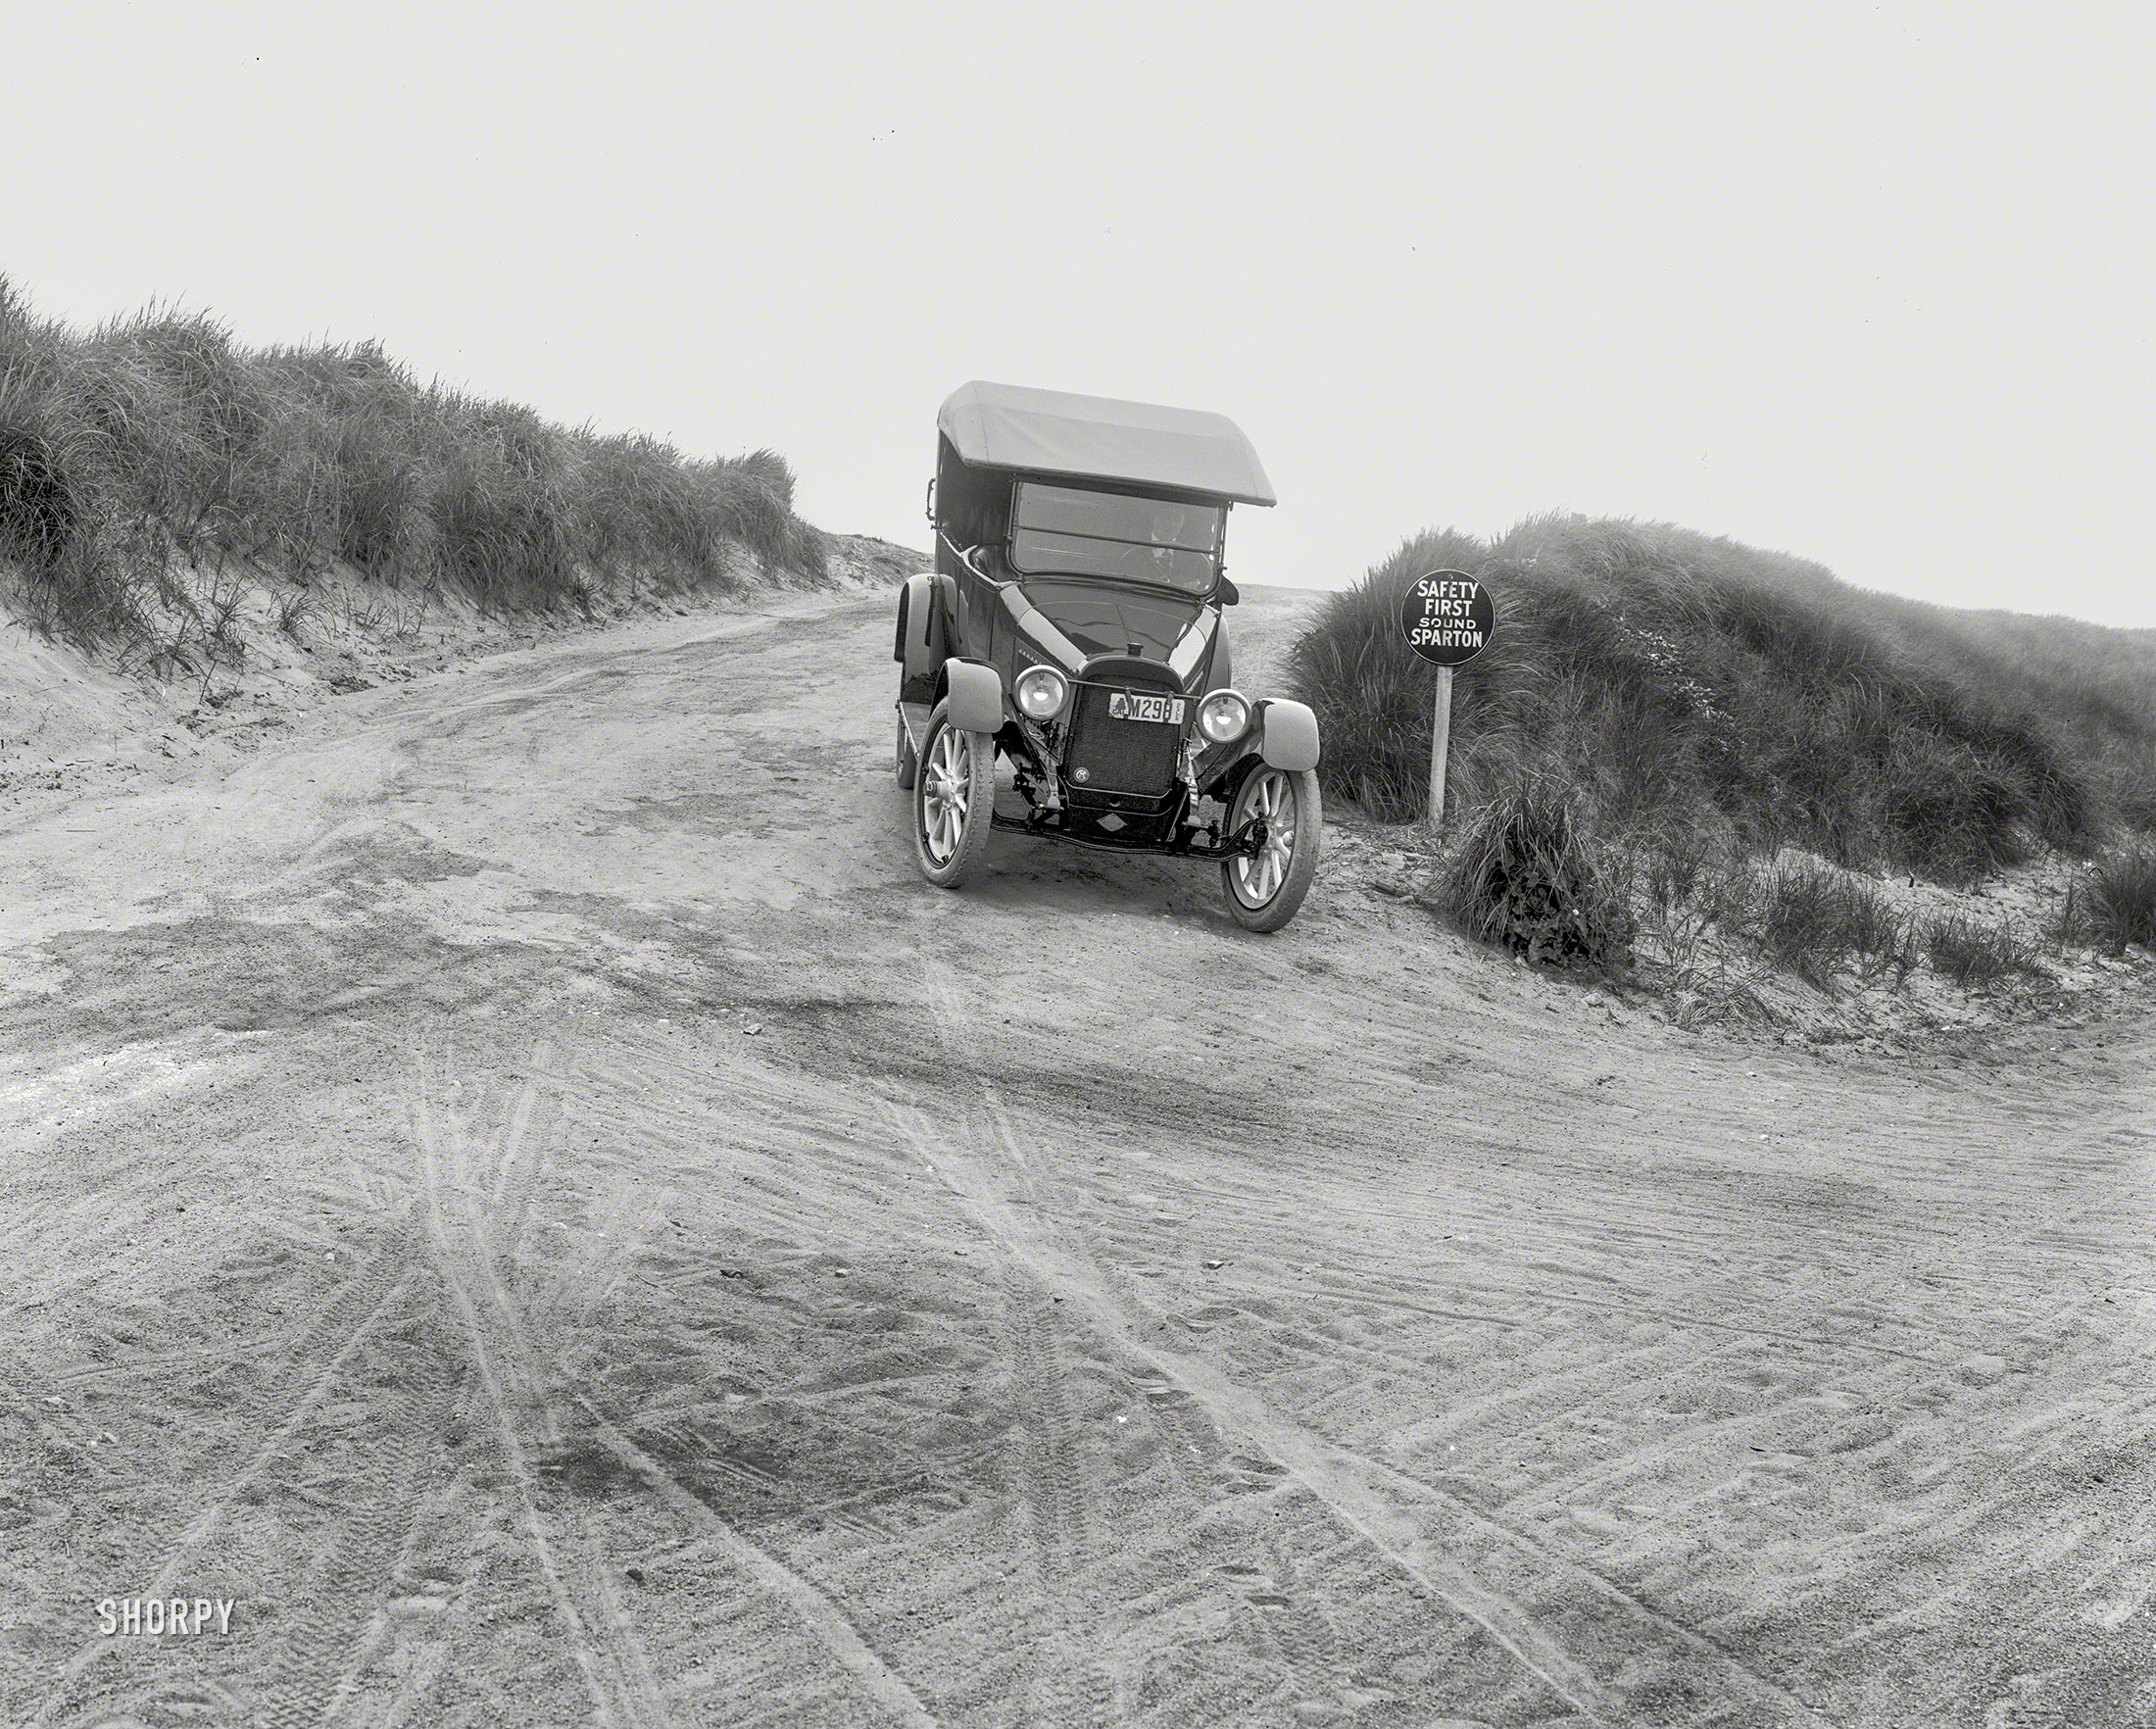 California in 1918. "Chalmers touring car on dunes." Along with a reminder from the Sparton auto-accessories company to sound your horn -- branding disguised as a safety message. 5x7 glass negative by Christopher Helin. View full size.